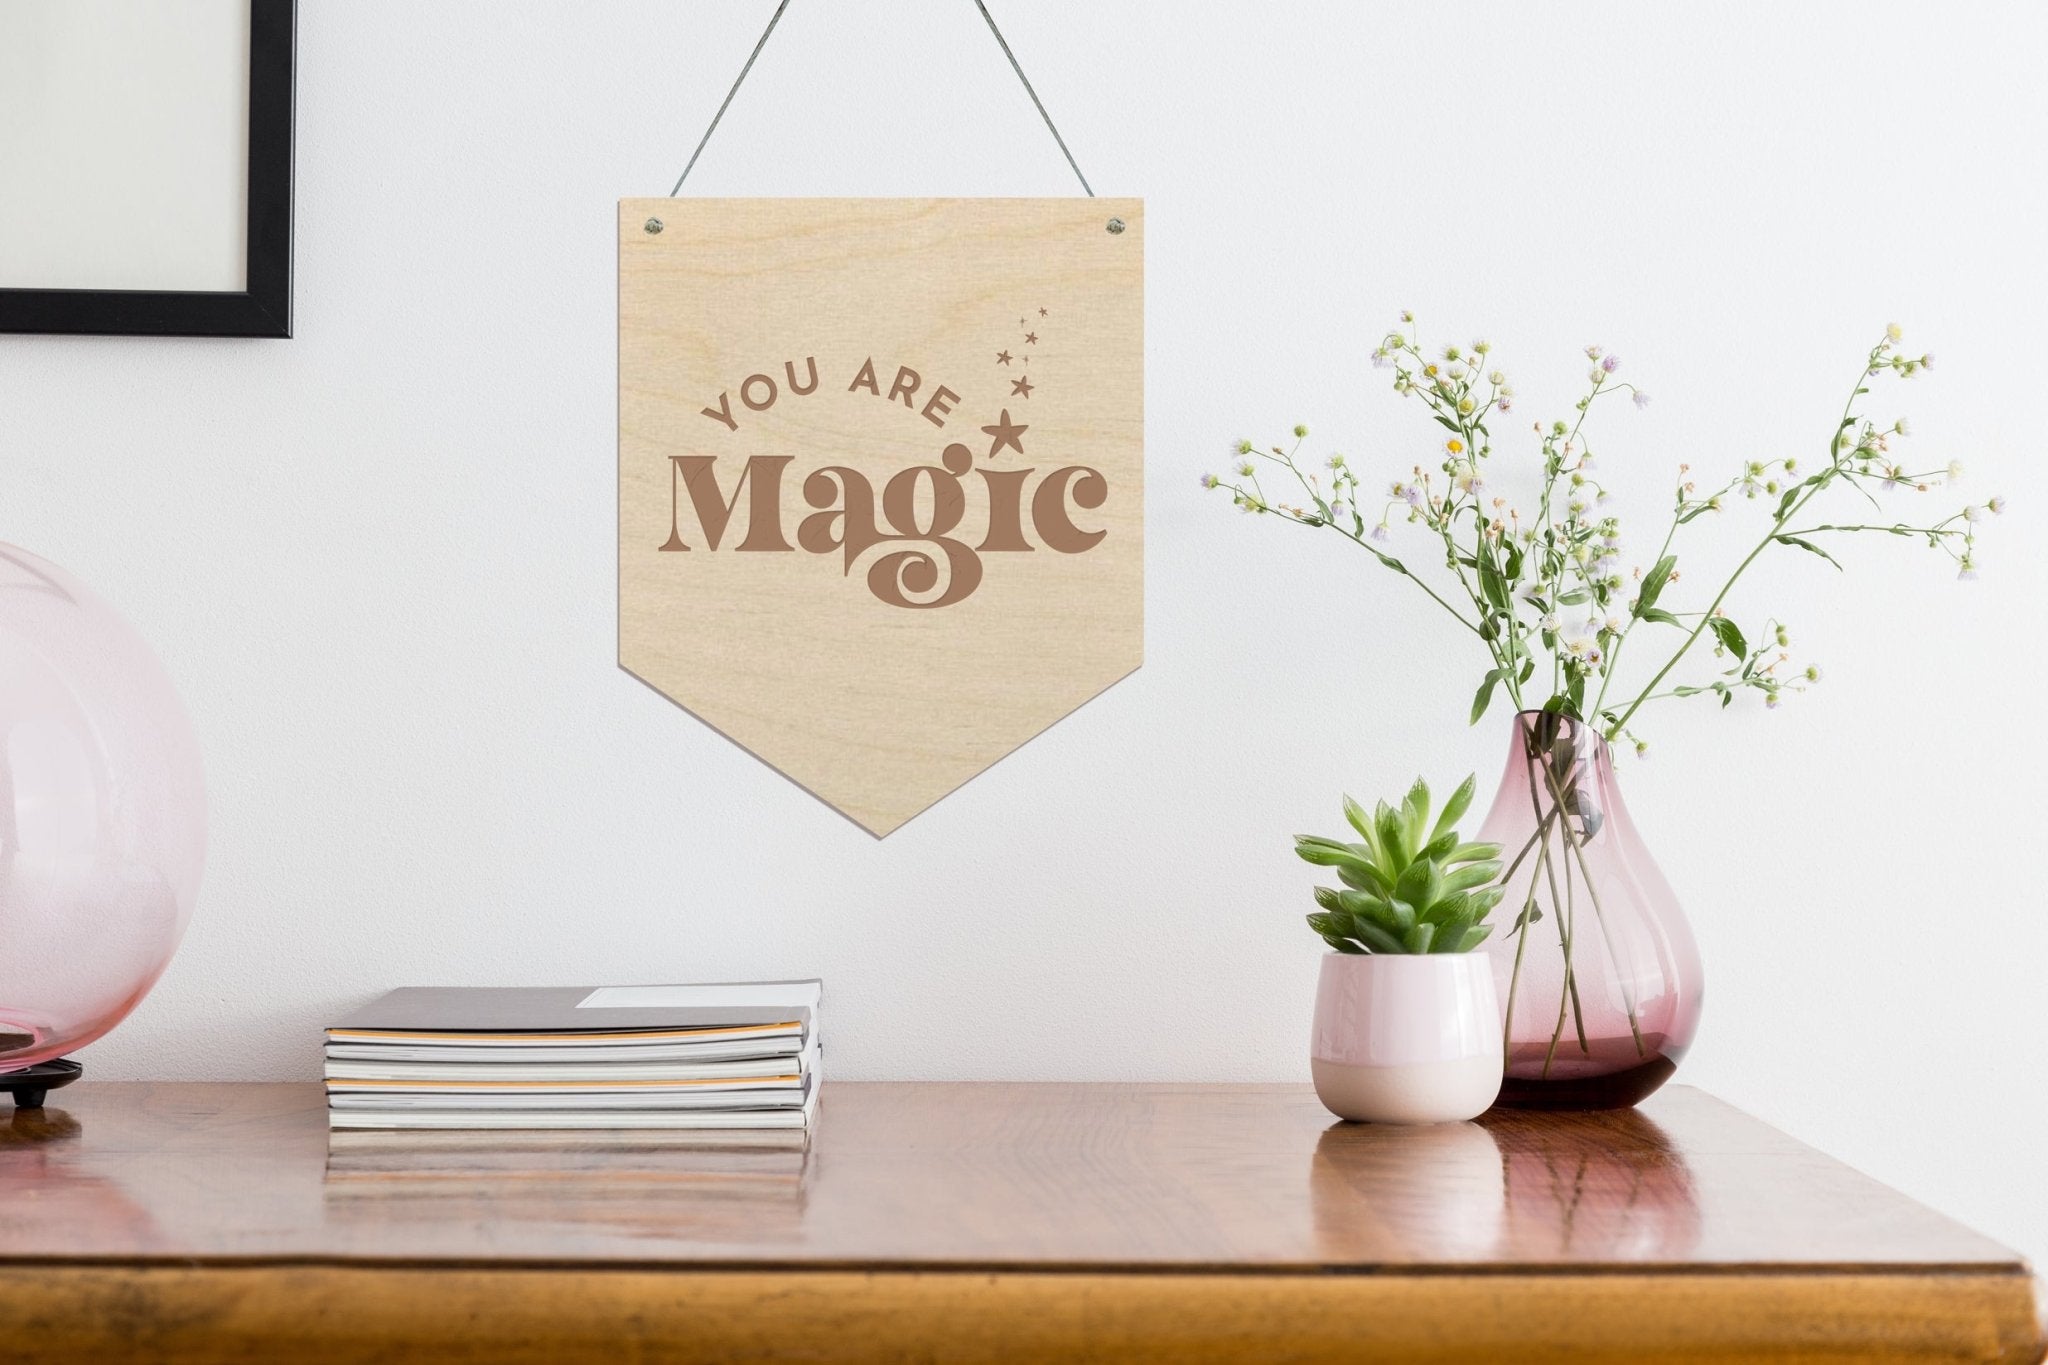 You are Magic wooden banner